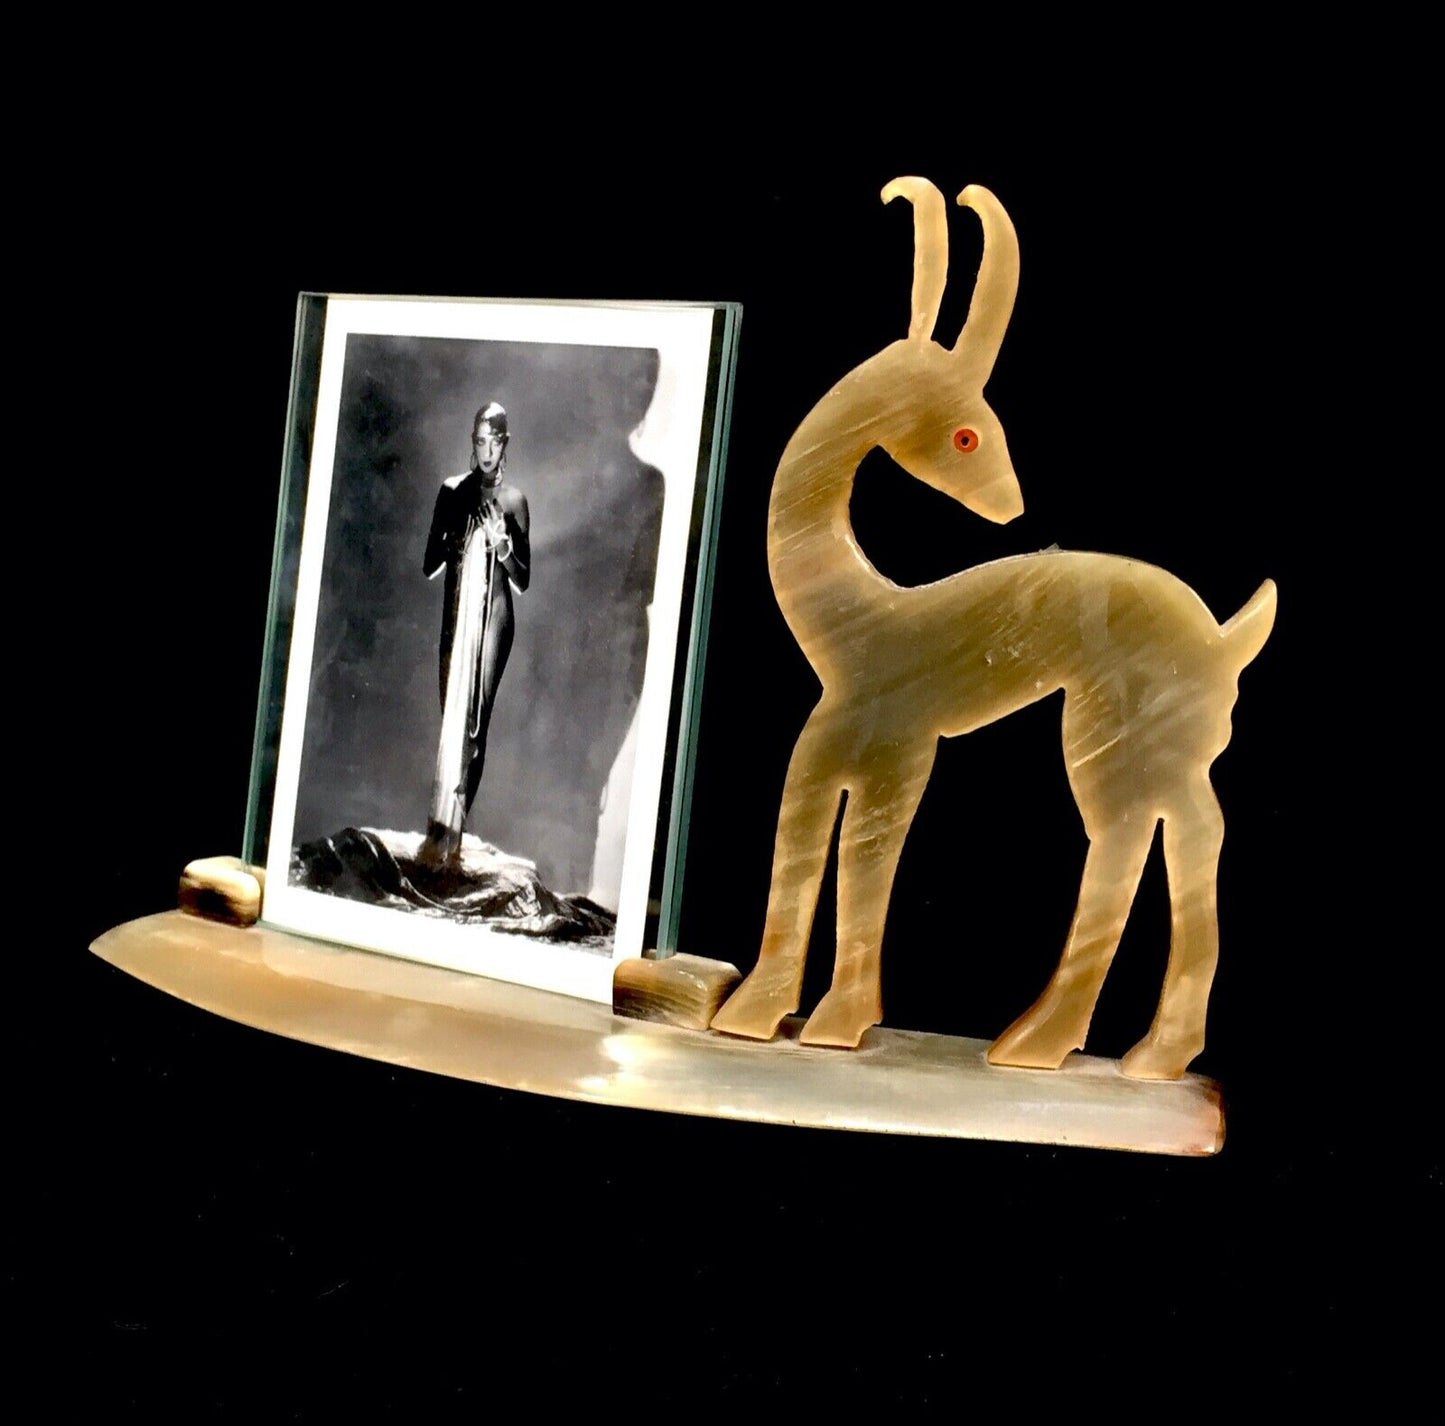 Antique Art Deco Bakelite & Glass Photograph Frame With Deer / Stag Figurine